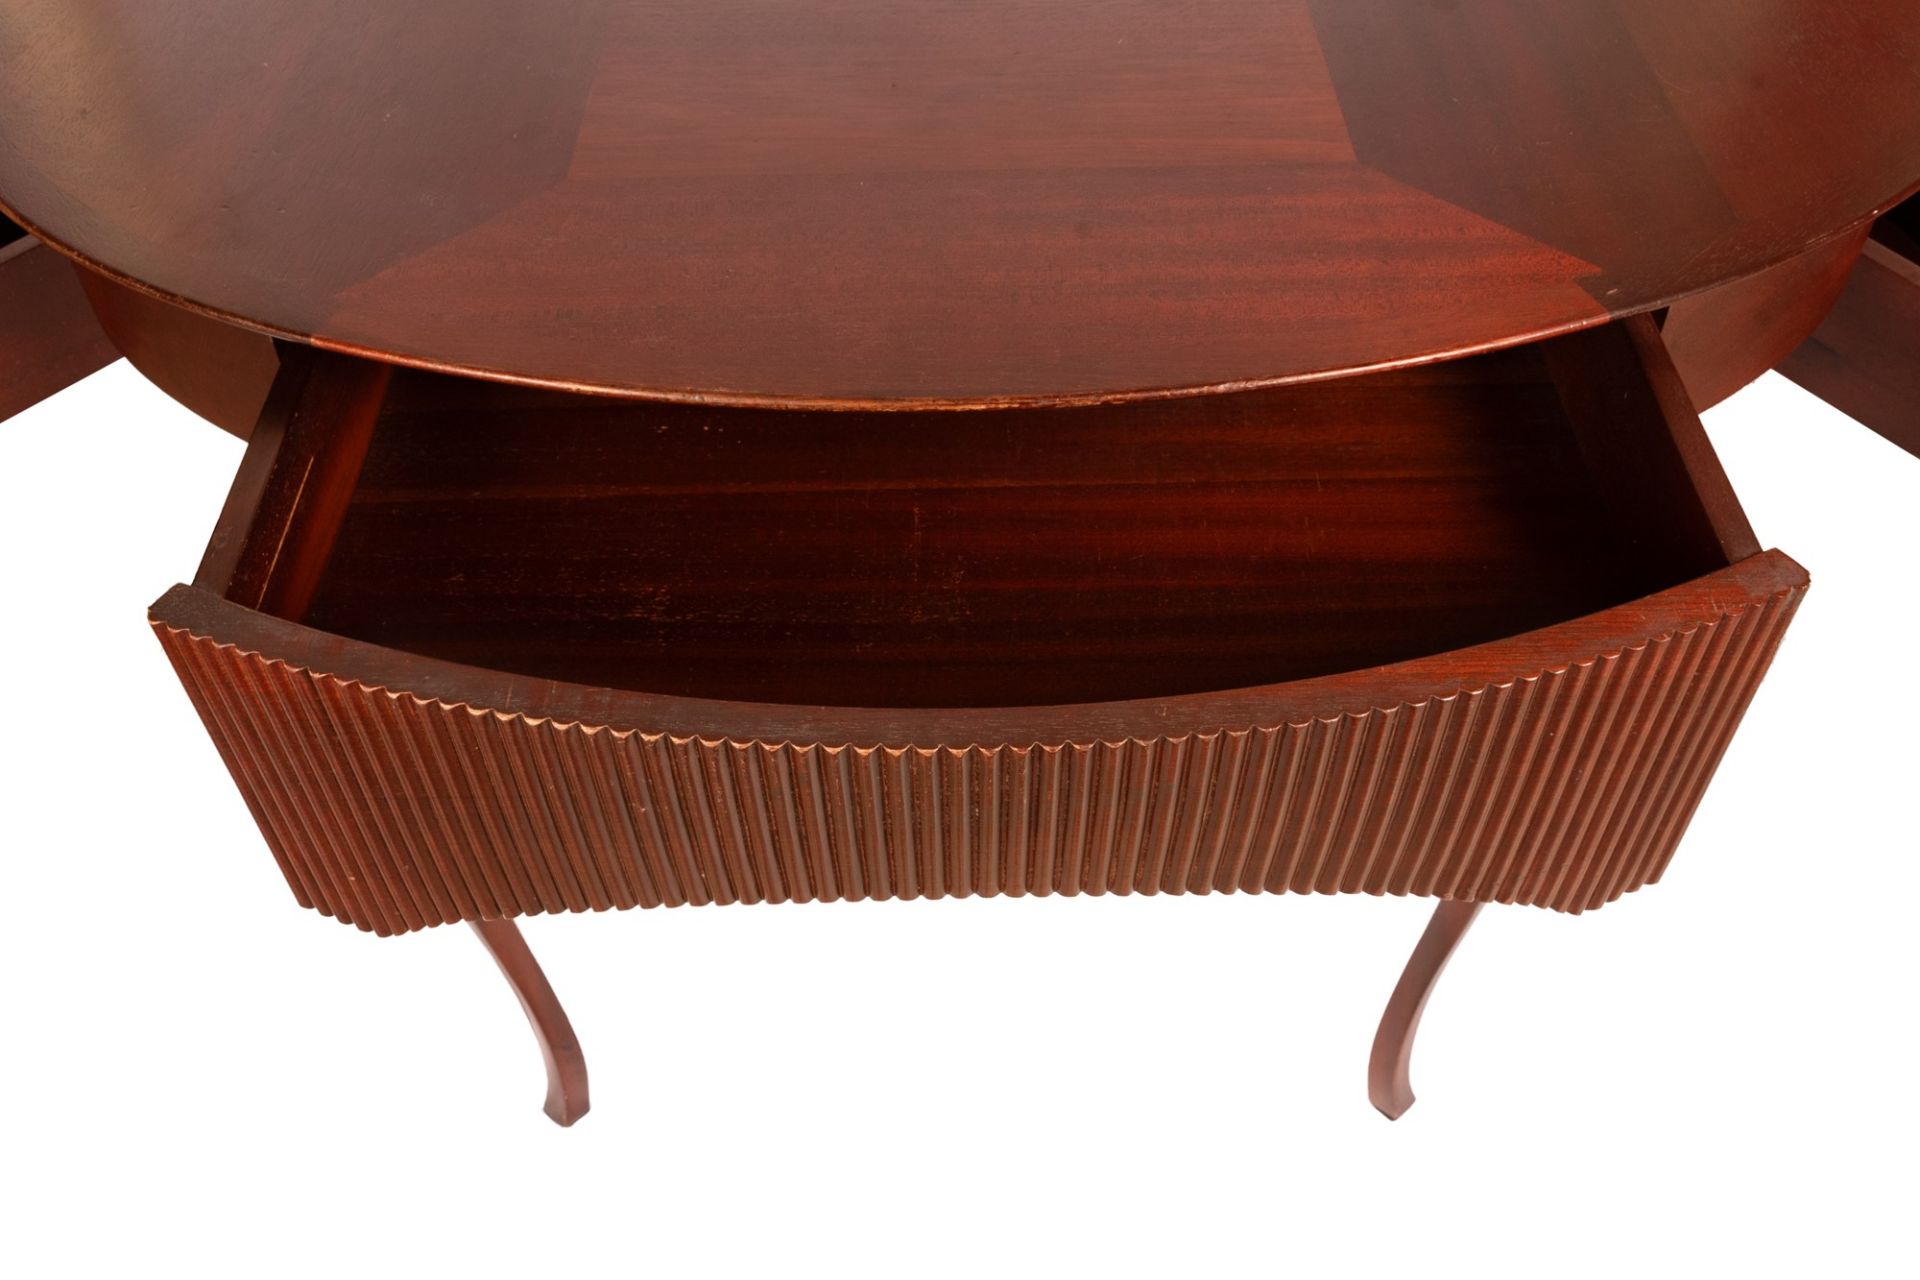 Writing desk in cherry wood - Image 18 of 25